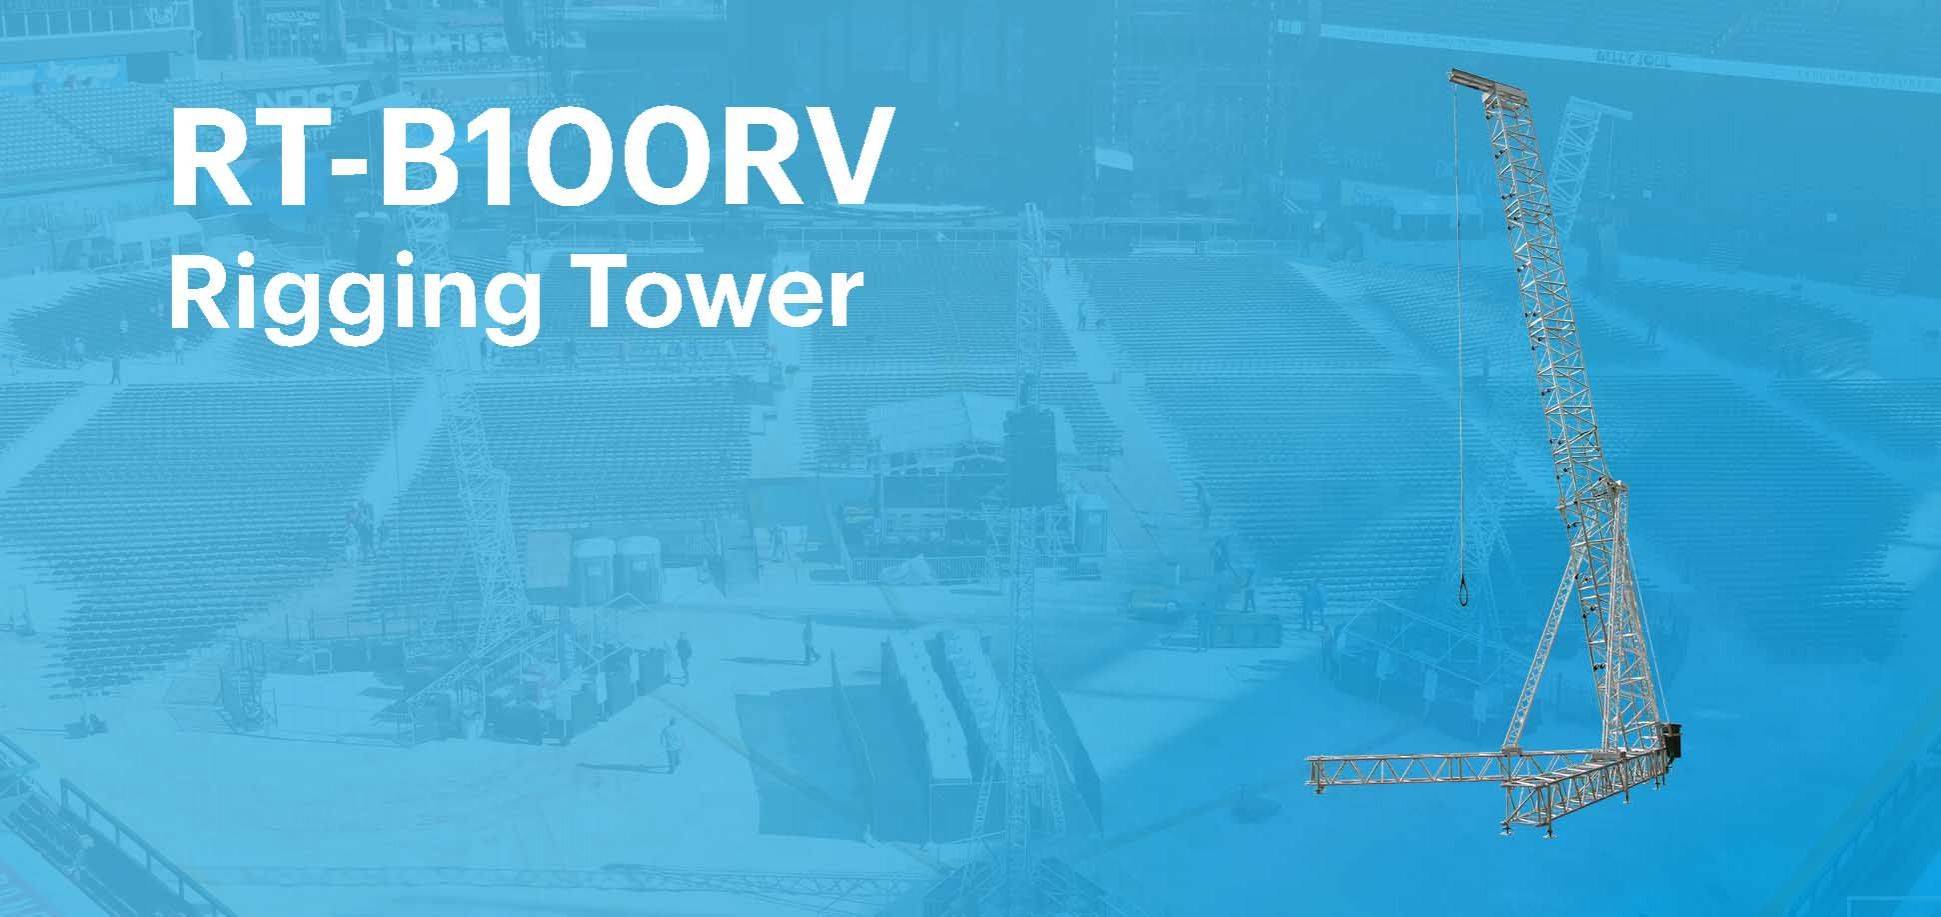 Product Focus - B100RV Rigging Tower